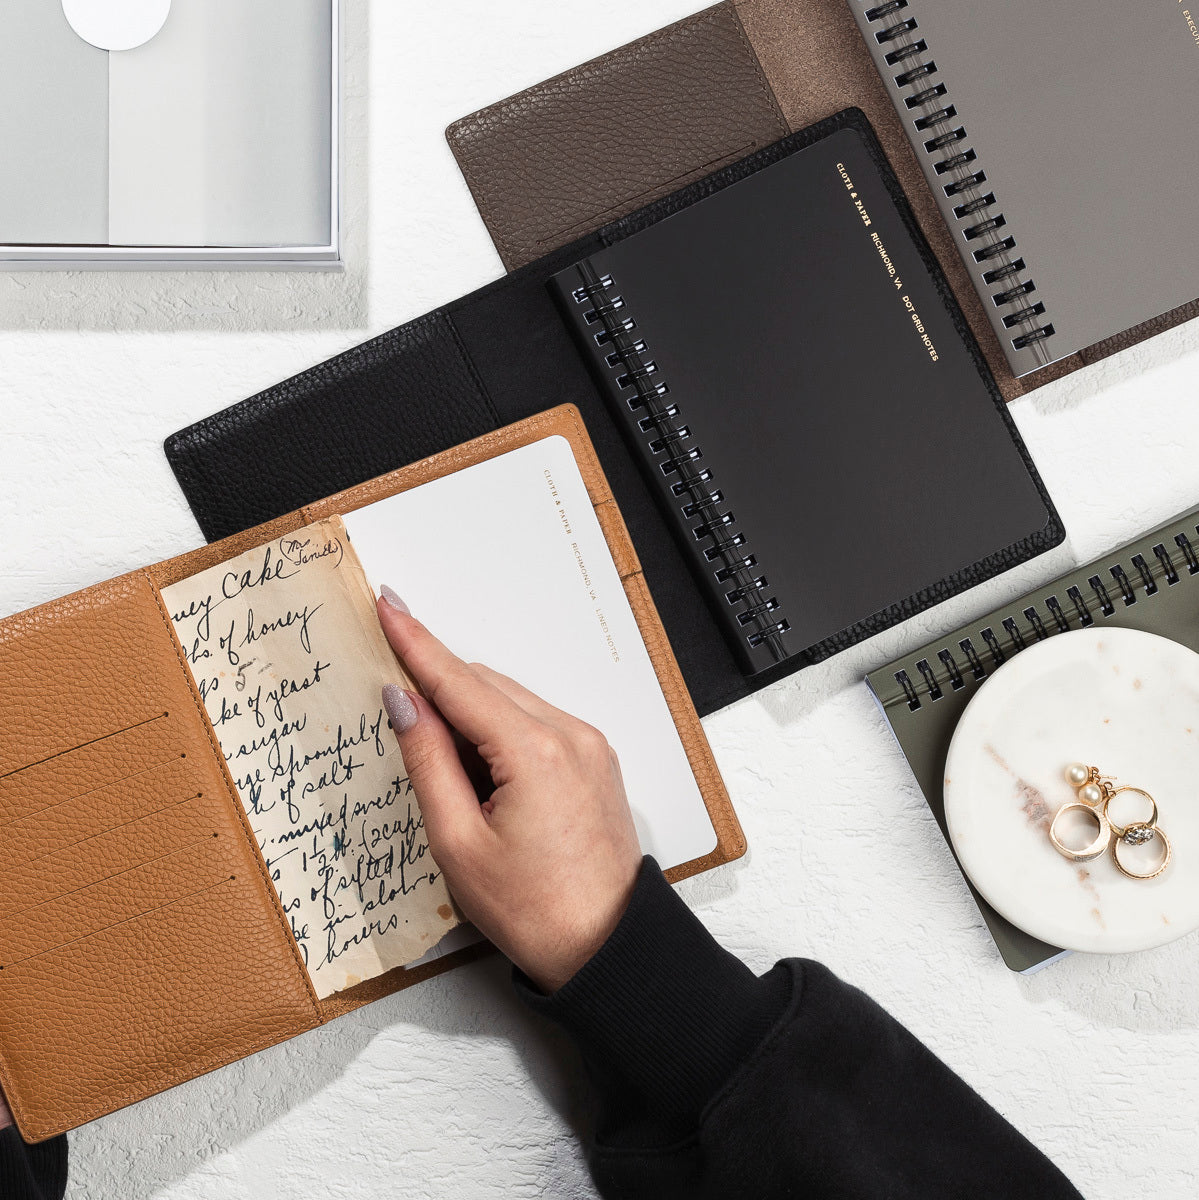 A few Heirloom Leather Folios are opened on a white desk.  A hand is adding some pages of notes to one of the inner pockets.